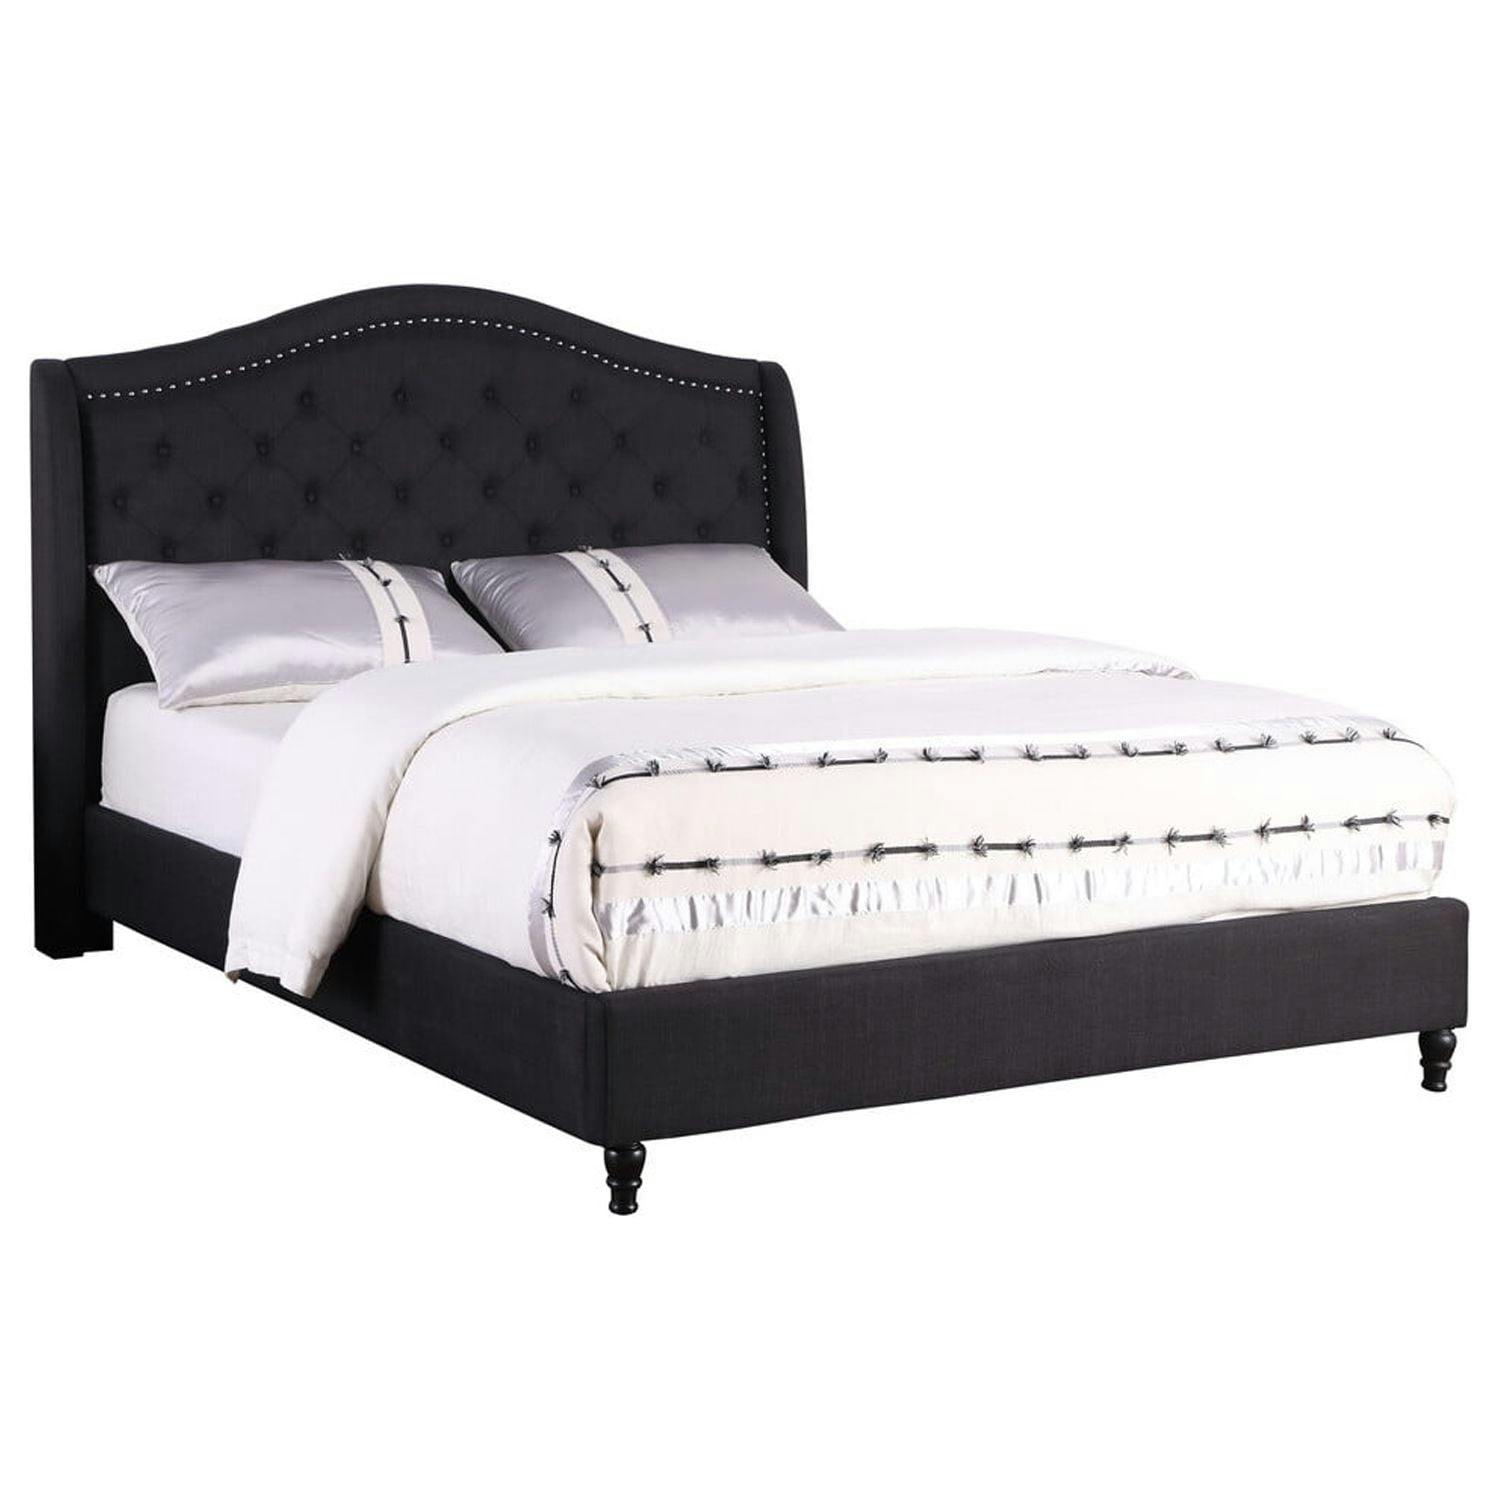 Luxurious King-Sized Black Pine Wood Tufted Upholstered Bed with Nailhead Trim